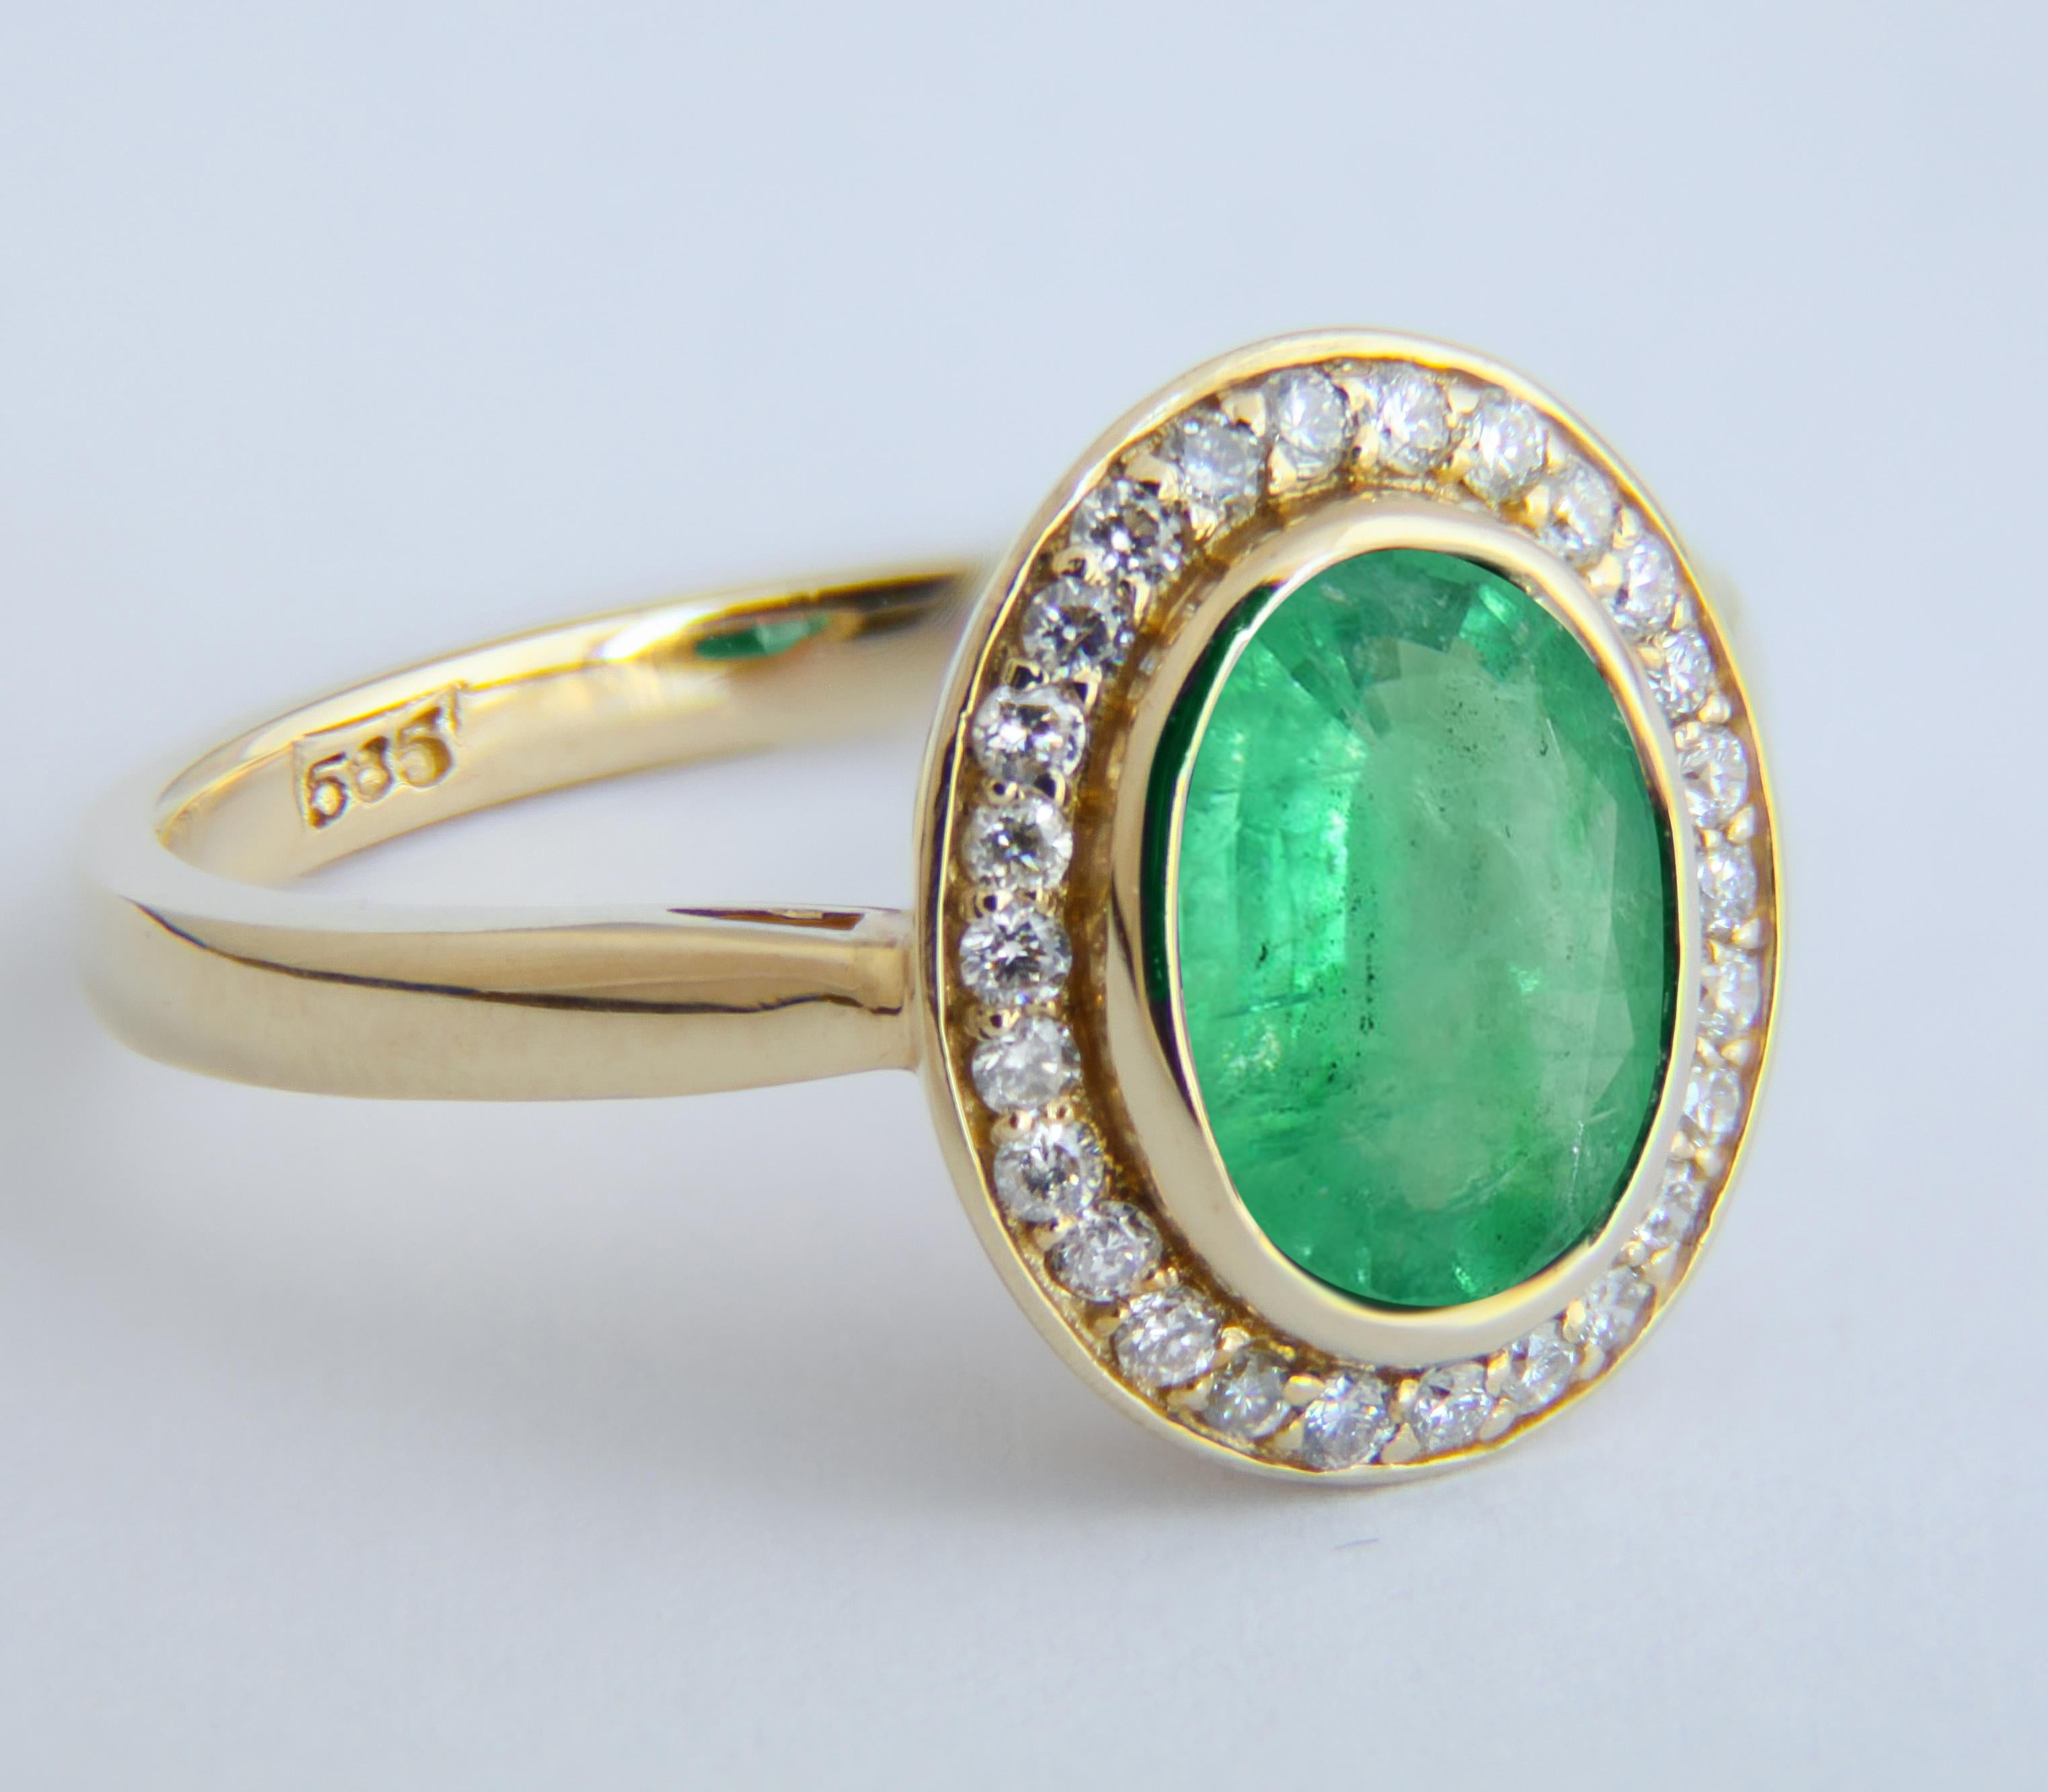 For Sale:  Emerald and diamonds 14k gold ring. 5